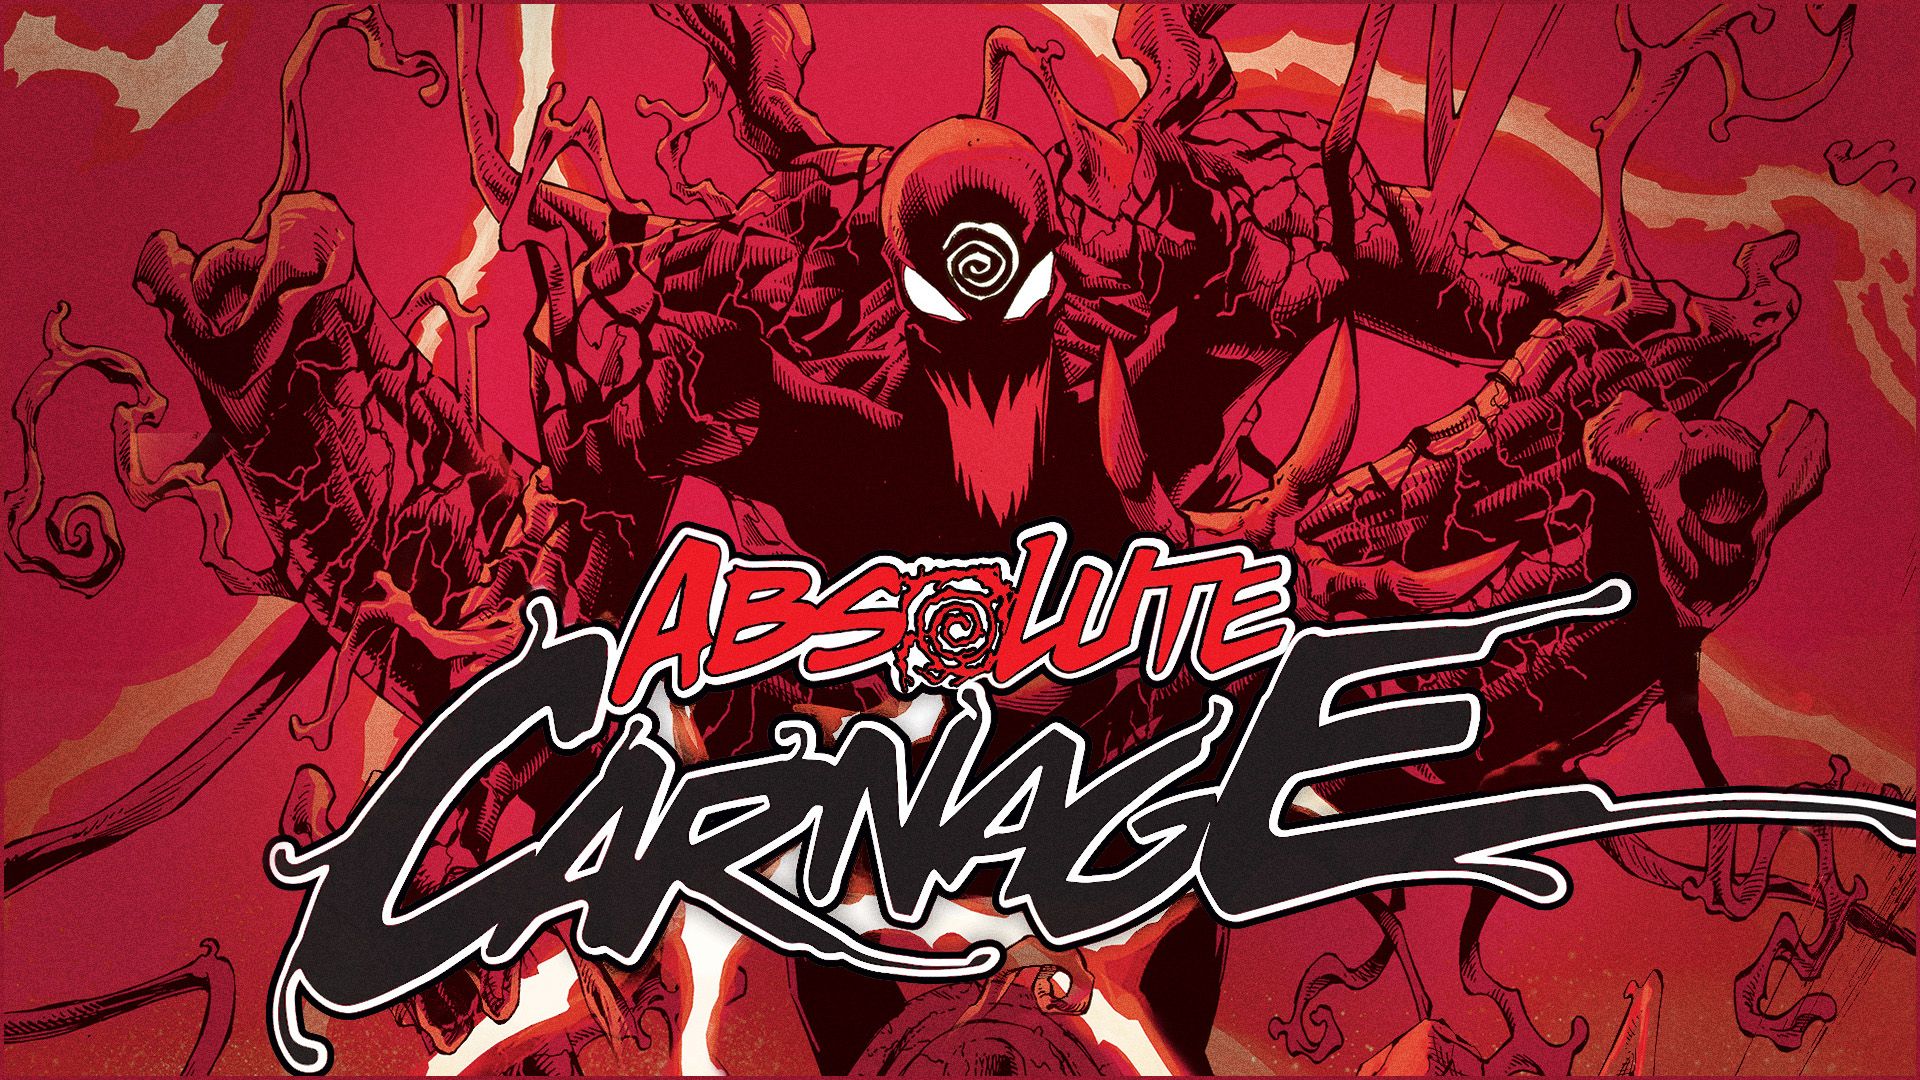 Absolute Carnage of the Carnage Symbiote